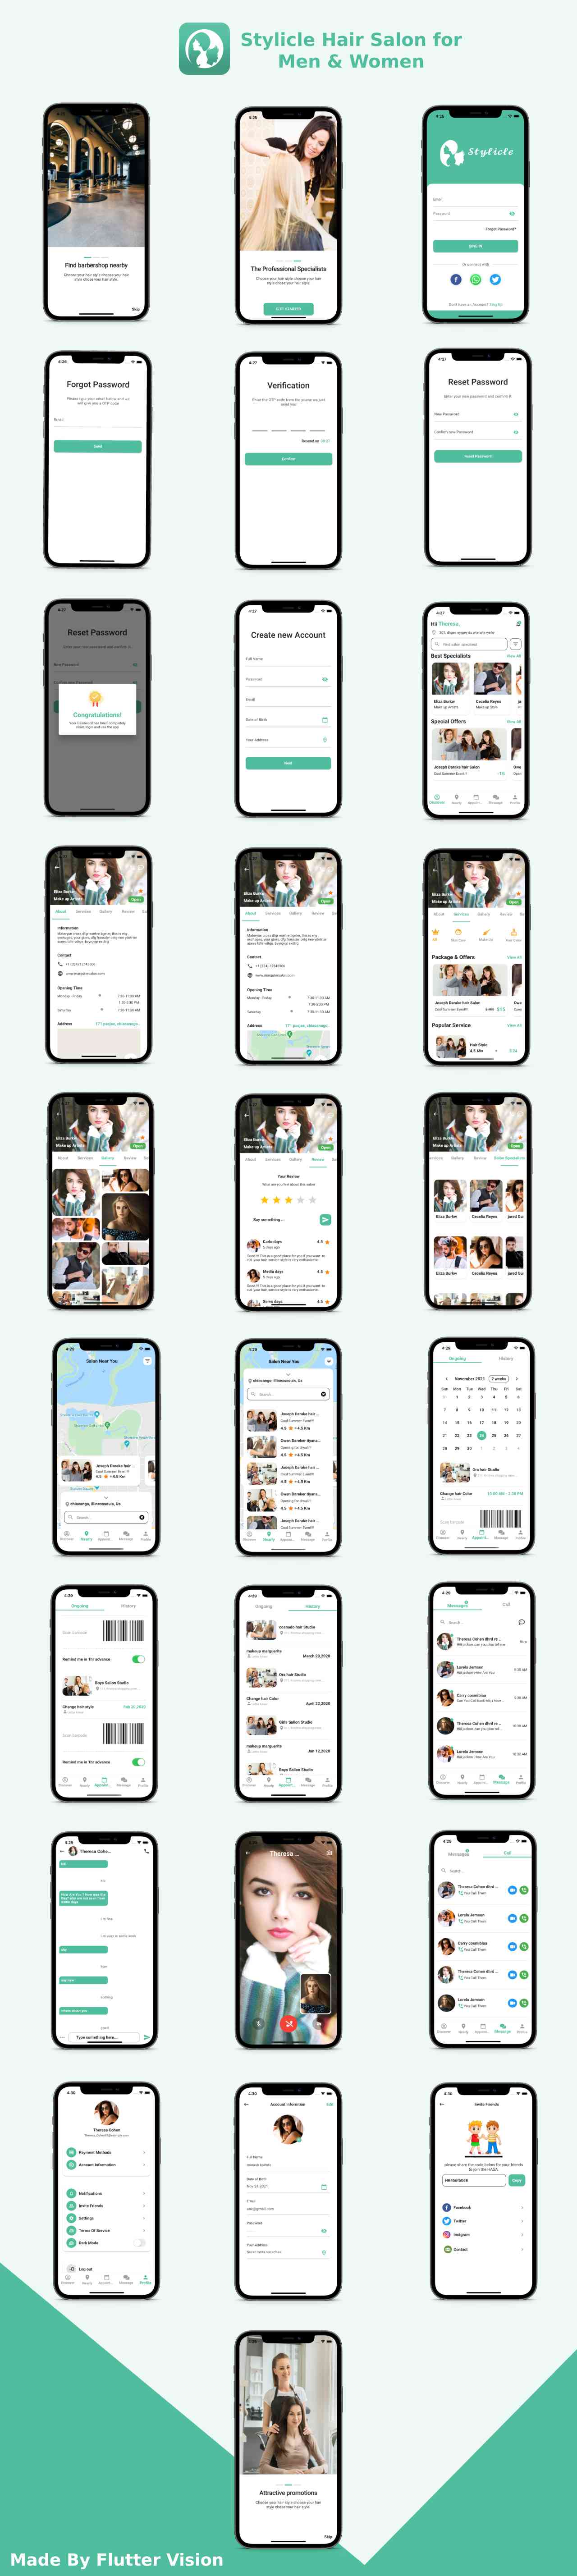 Hair Salon Booking Android App Template + iOS App Template | Flutter | Stylicle - 3